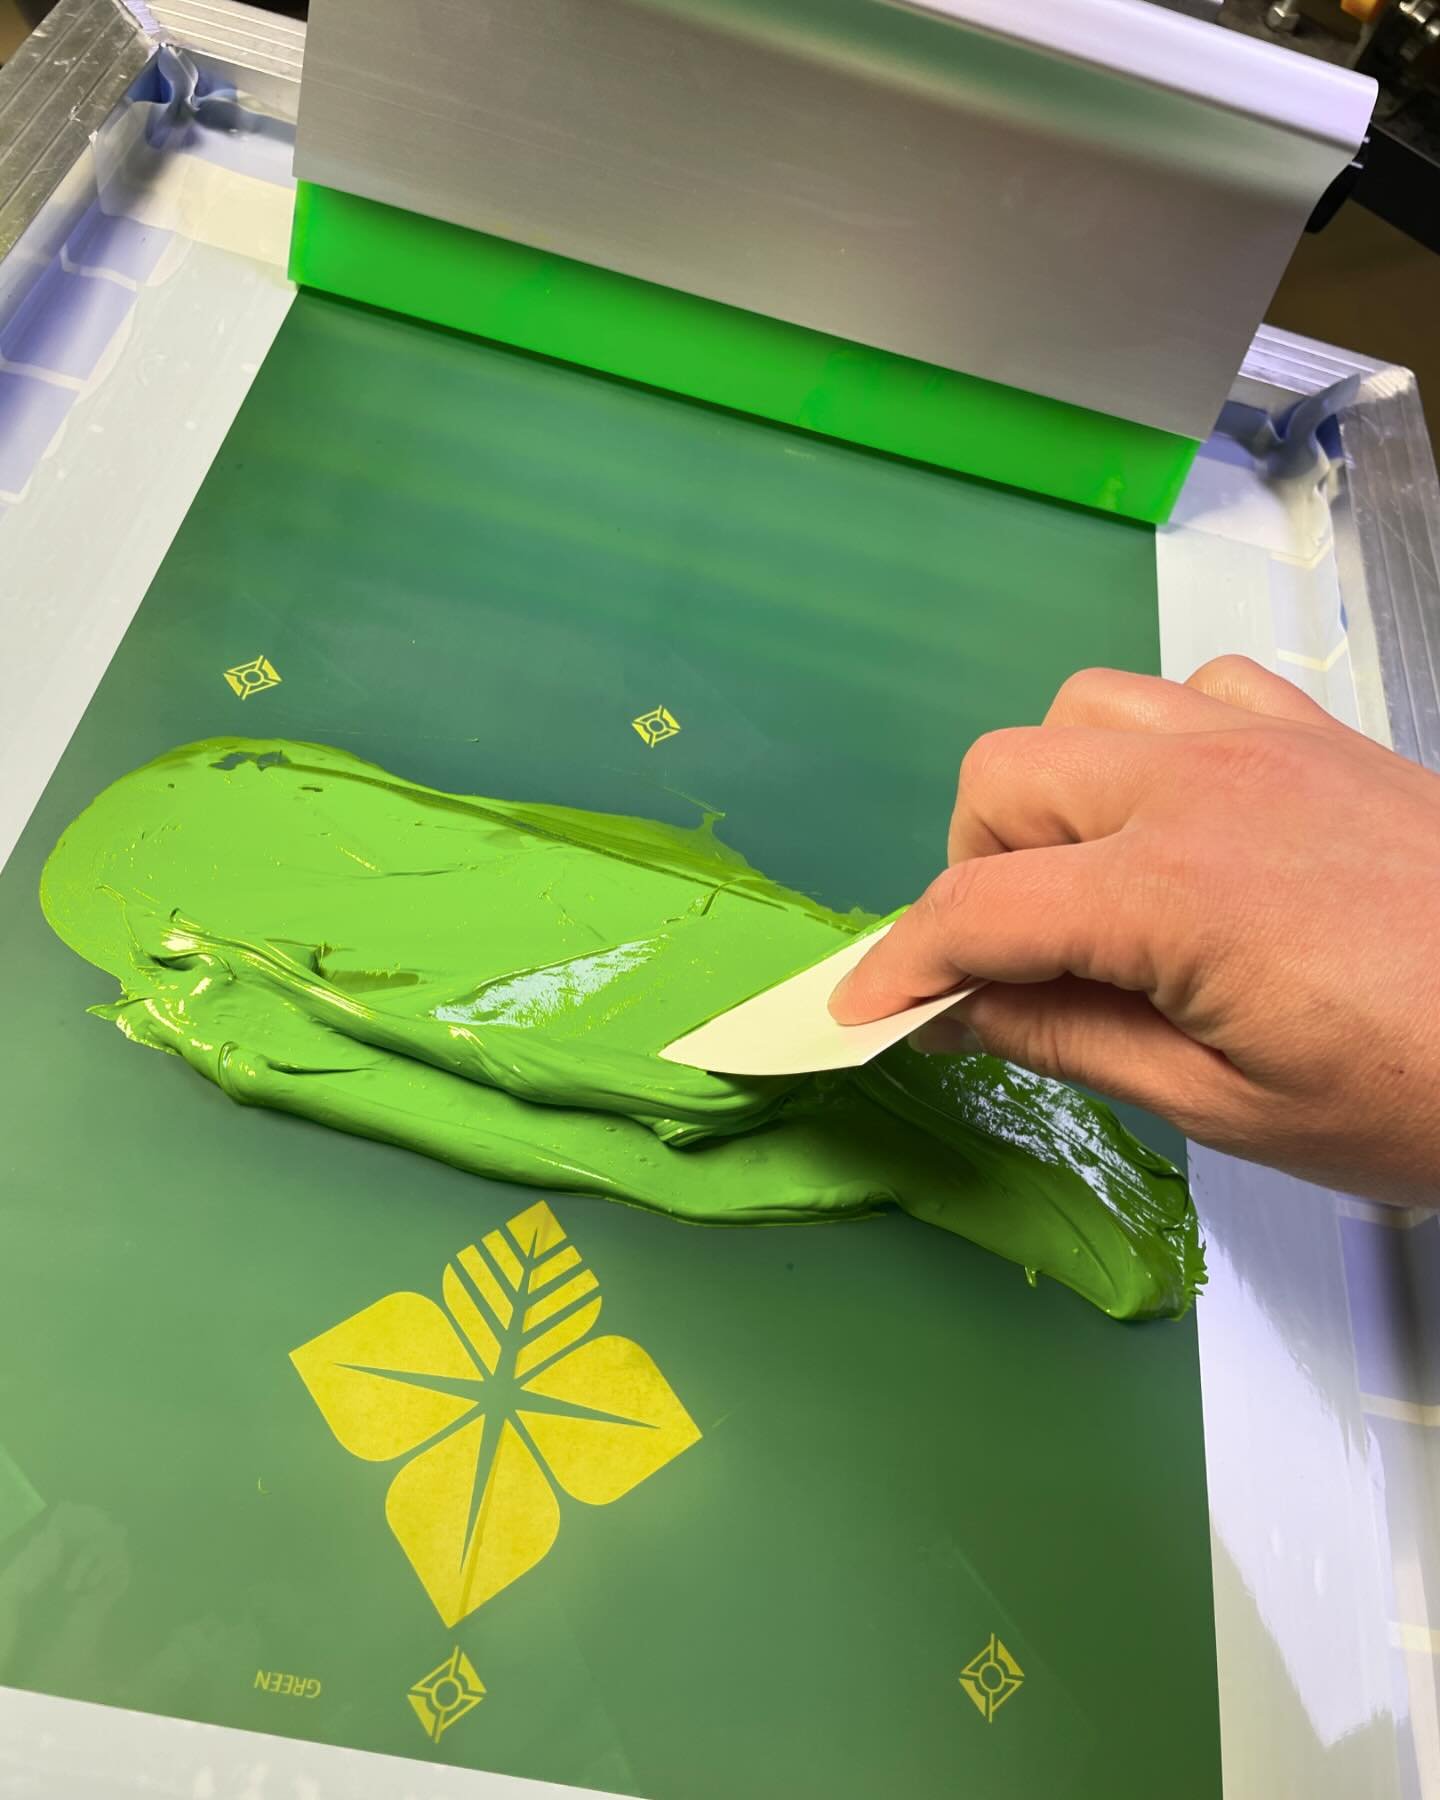 🌿 Spring vibes are in full swing at The Print Shop! 🌿 Just perfected a stunning Pantone-matched green, tailor-made for the vibrant landscapes of southern Colorado. From aglending to every project in between, The Print Shop Screen Printing Studio en